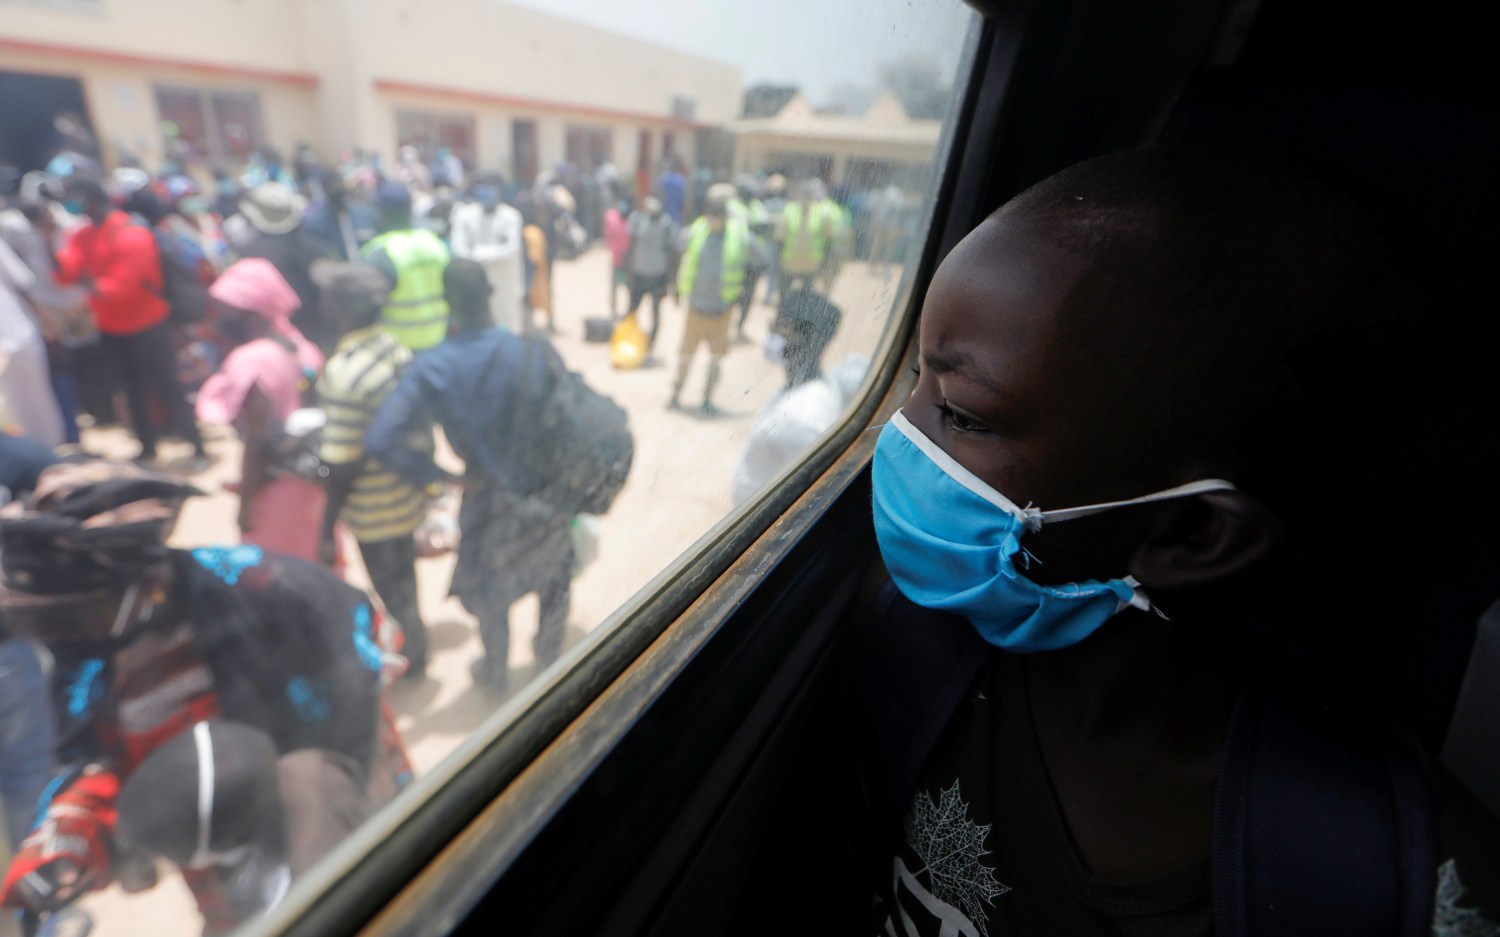 A boy looks out of a bus window as teachers prepare to board government chartered buses to go back to schools of countryside towns, scheduled to reopen next week, amid travel bans between regions due to the coronavirus disease (COVID-19) outbreak, in Dakar, Senegal May 27, 2020. REUTERS/Zohra Bensemra     TPX IMAGES OF THE DAY